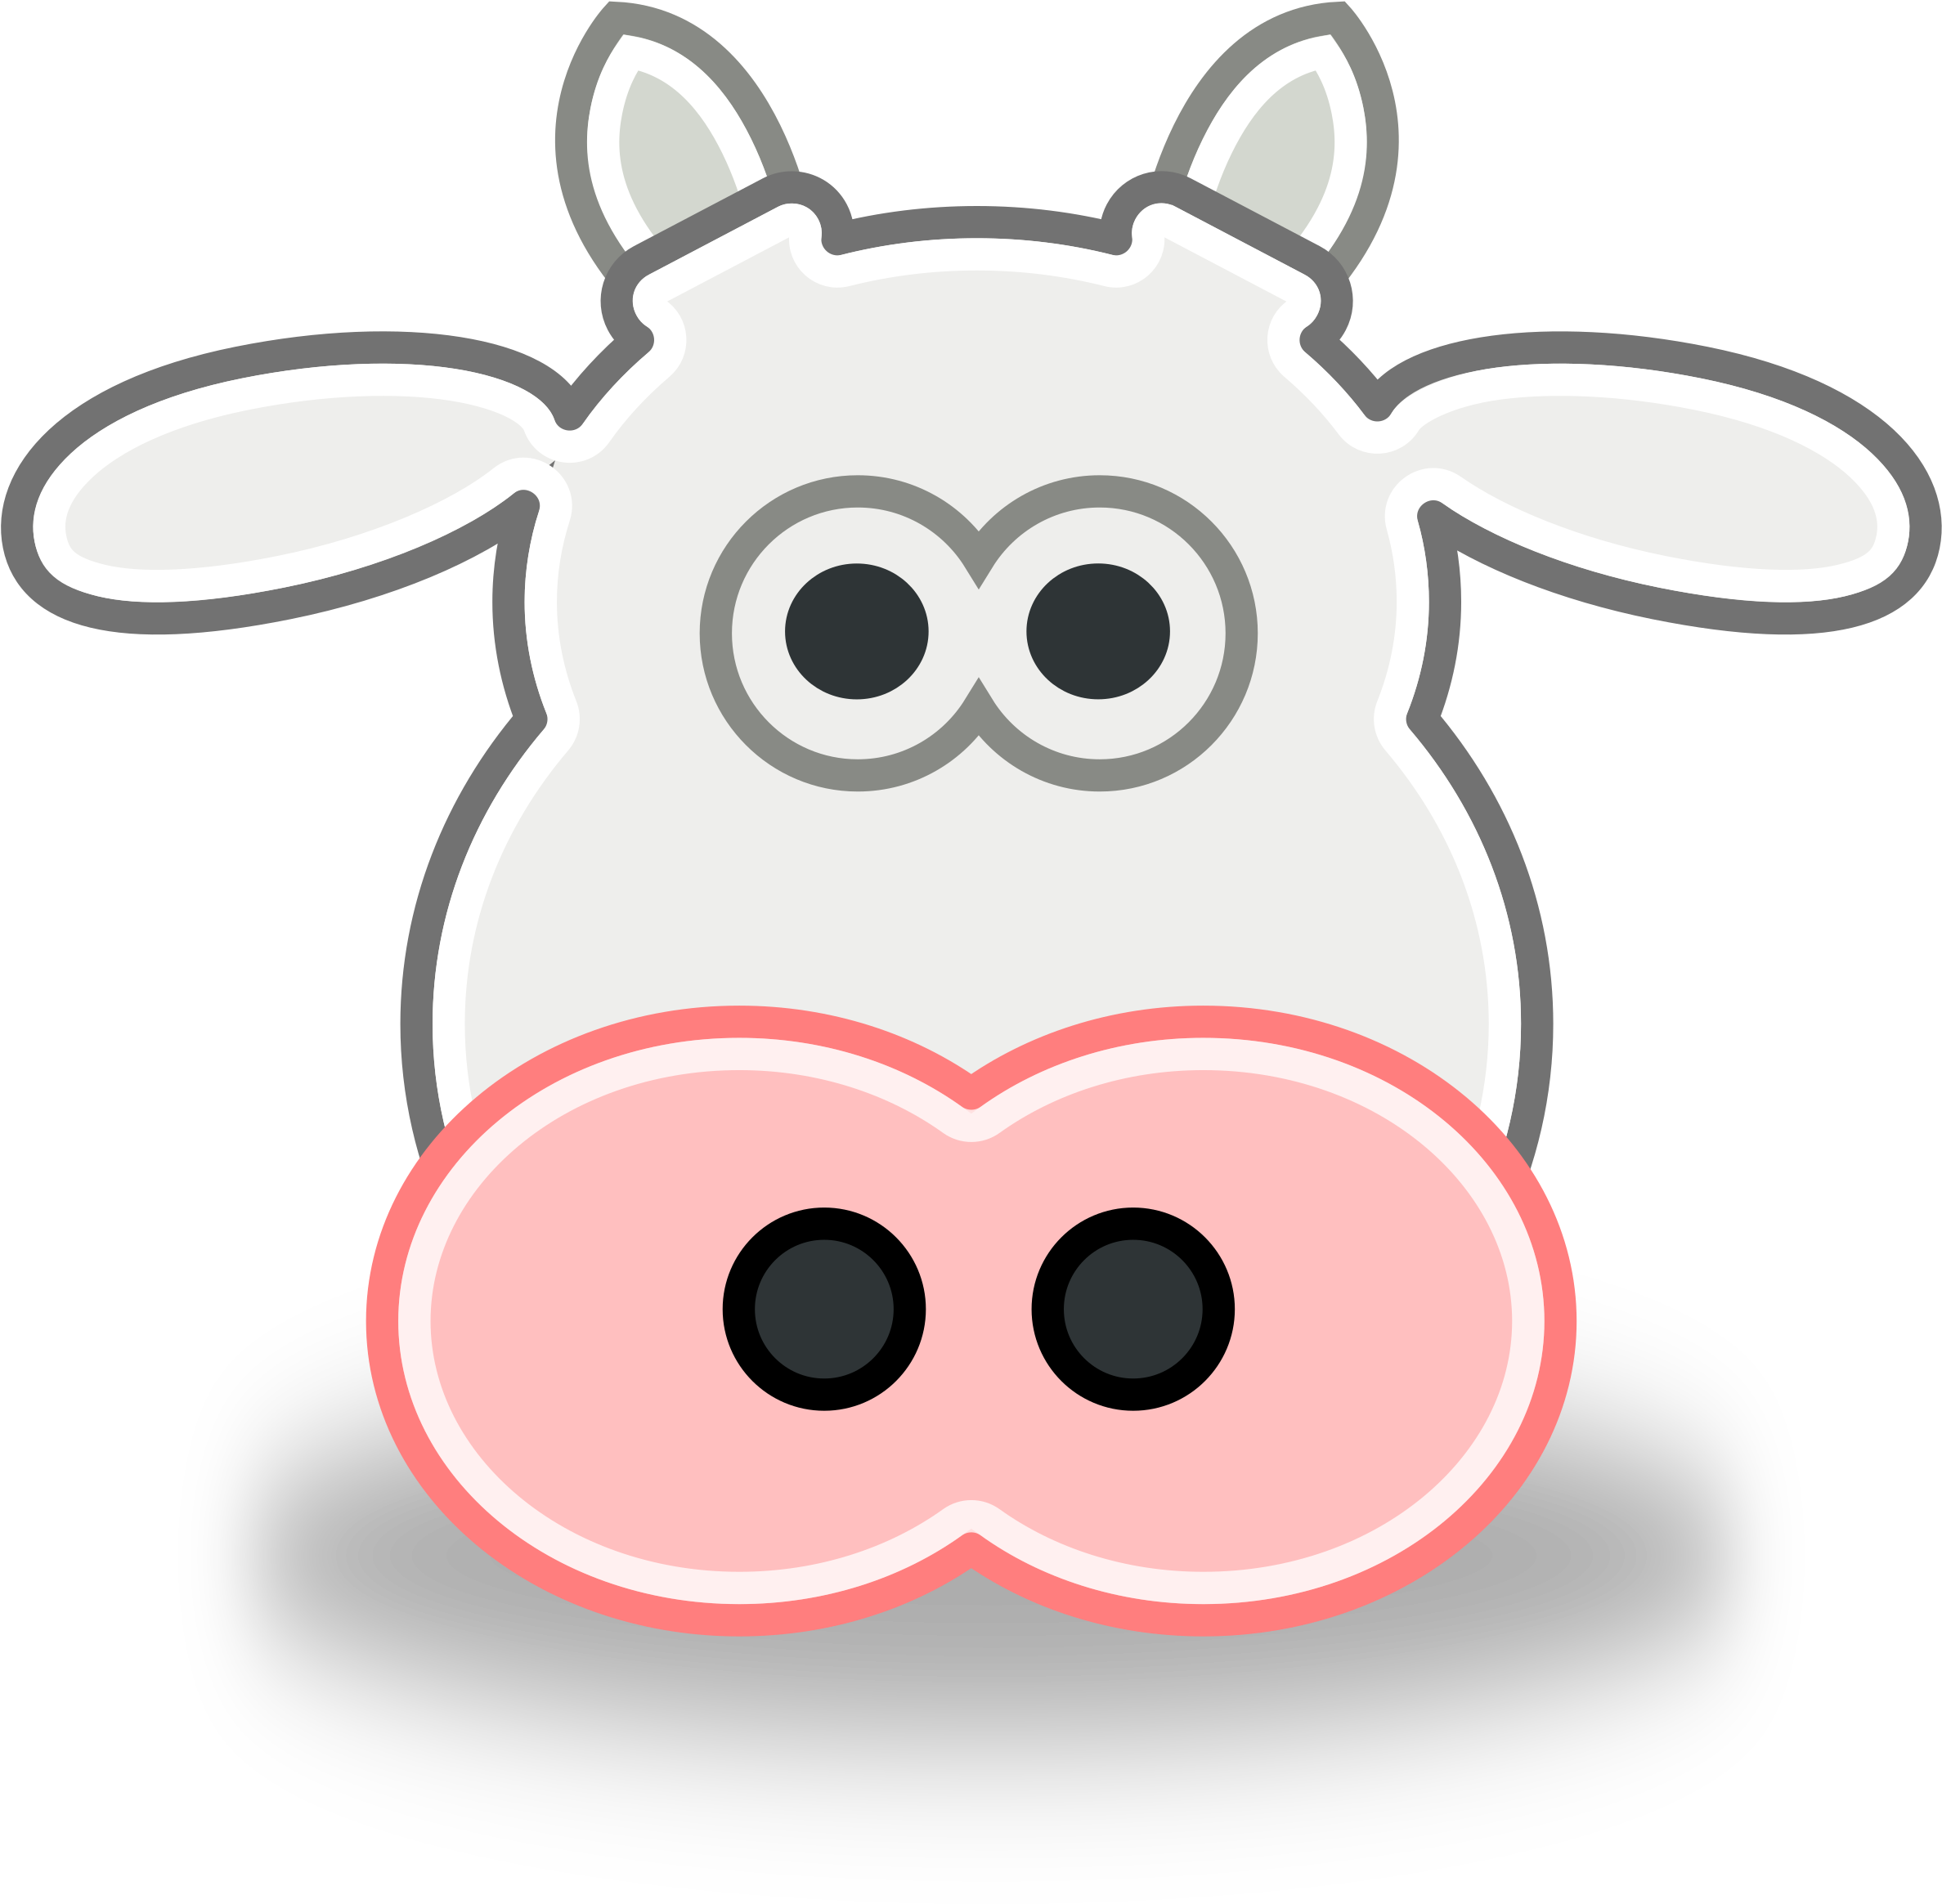 Style Cow Head - Cow Head Png (2400x2400)